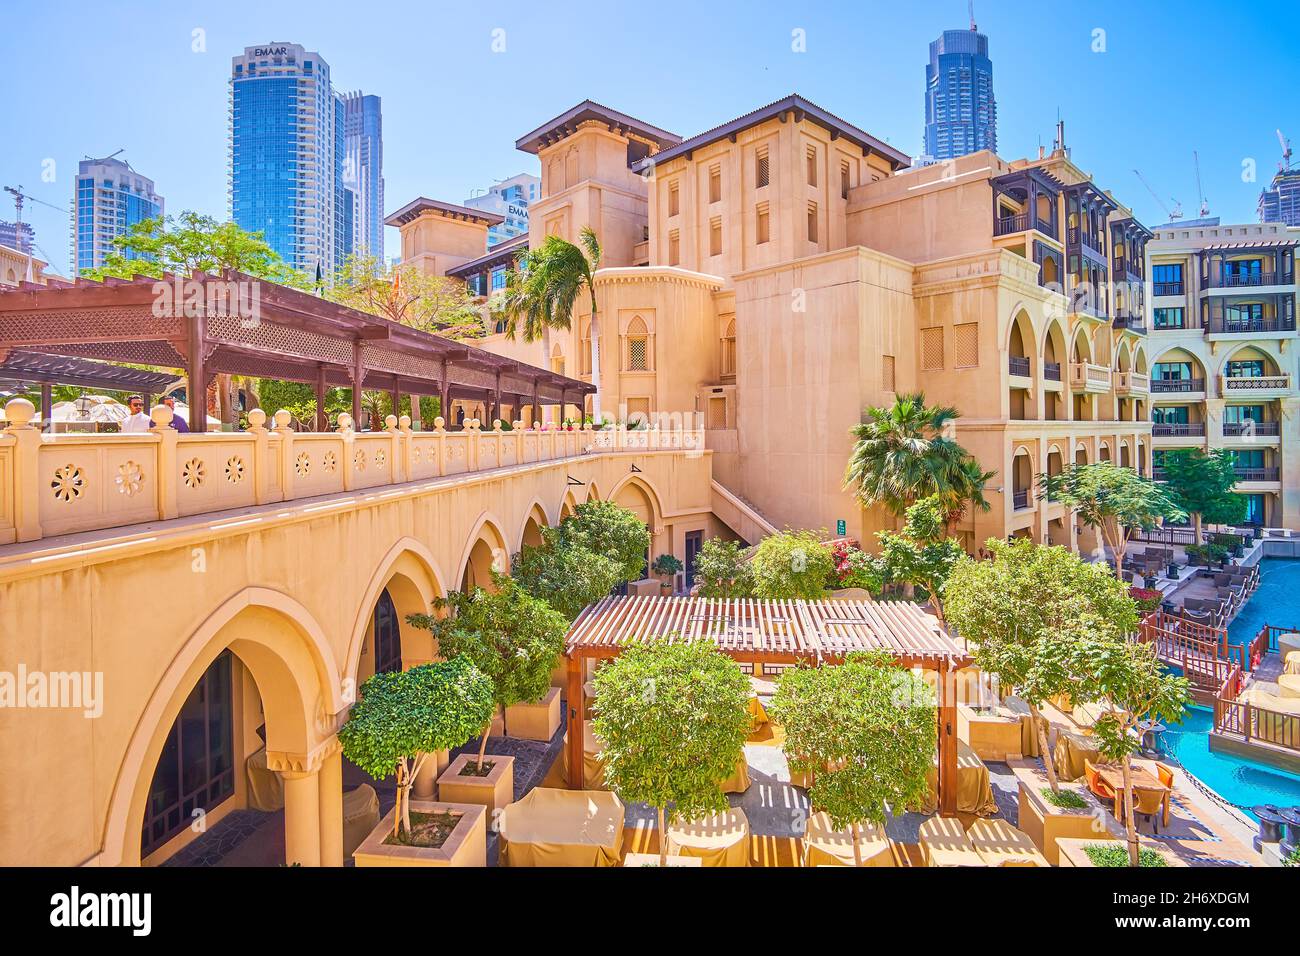 DUBAI, UAE - MARCH 3, 2020: Old Town Island is a perl of Arabic architecture, located in the heart of Downtown district, on March 3 in Dubai Stock Photo